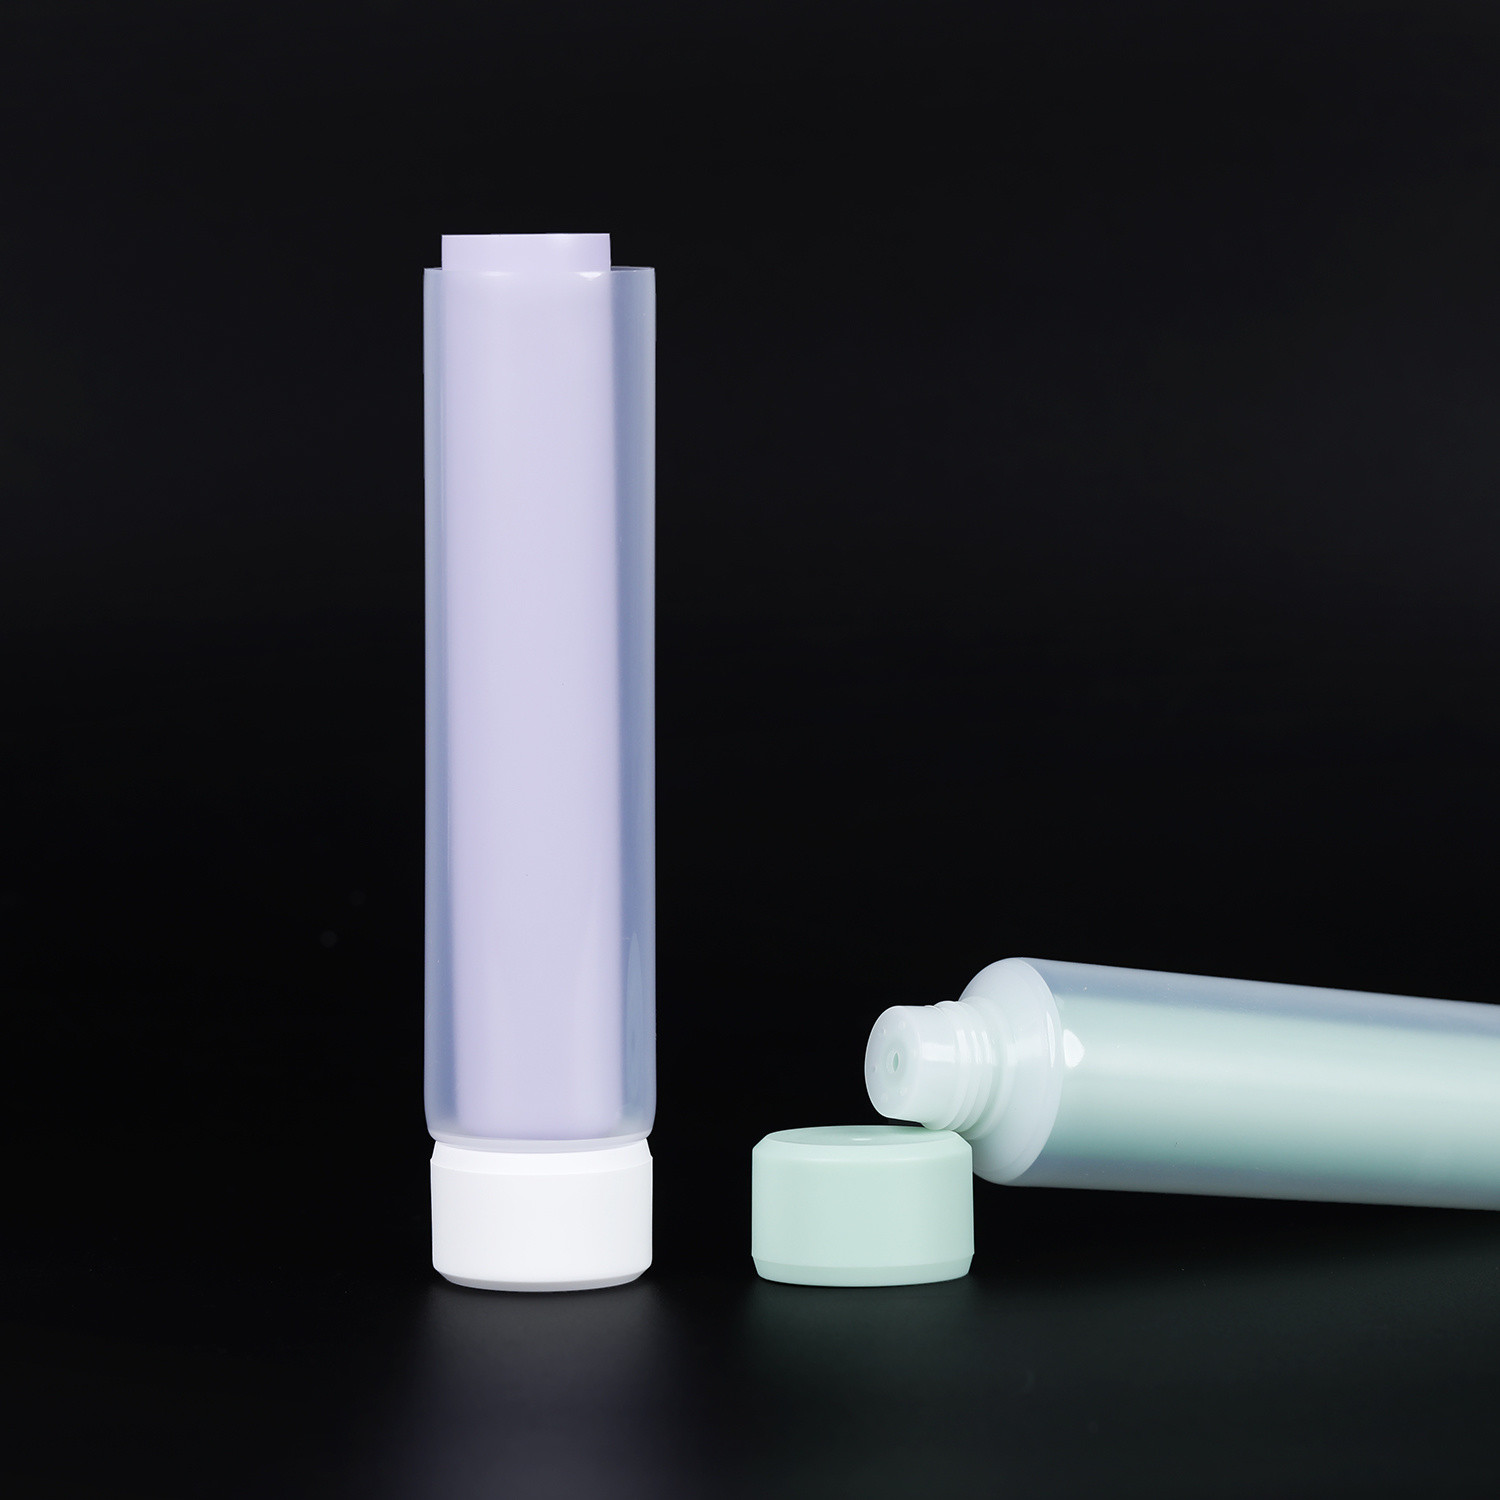 Hot Sale Colorful Transparent Cosmetic Squeeze Soft Plastic Packaging Tube